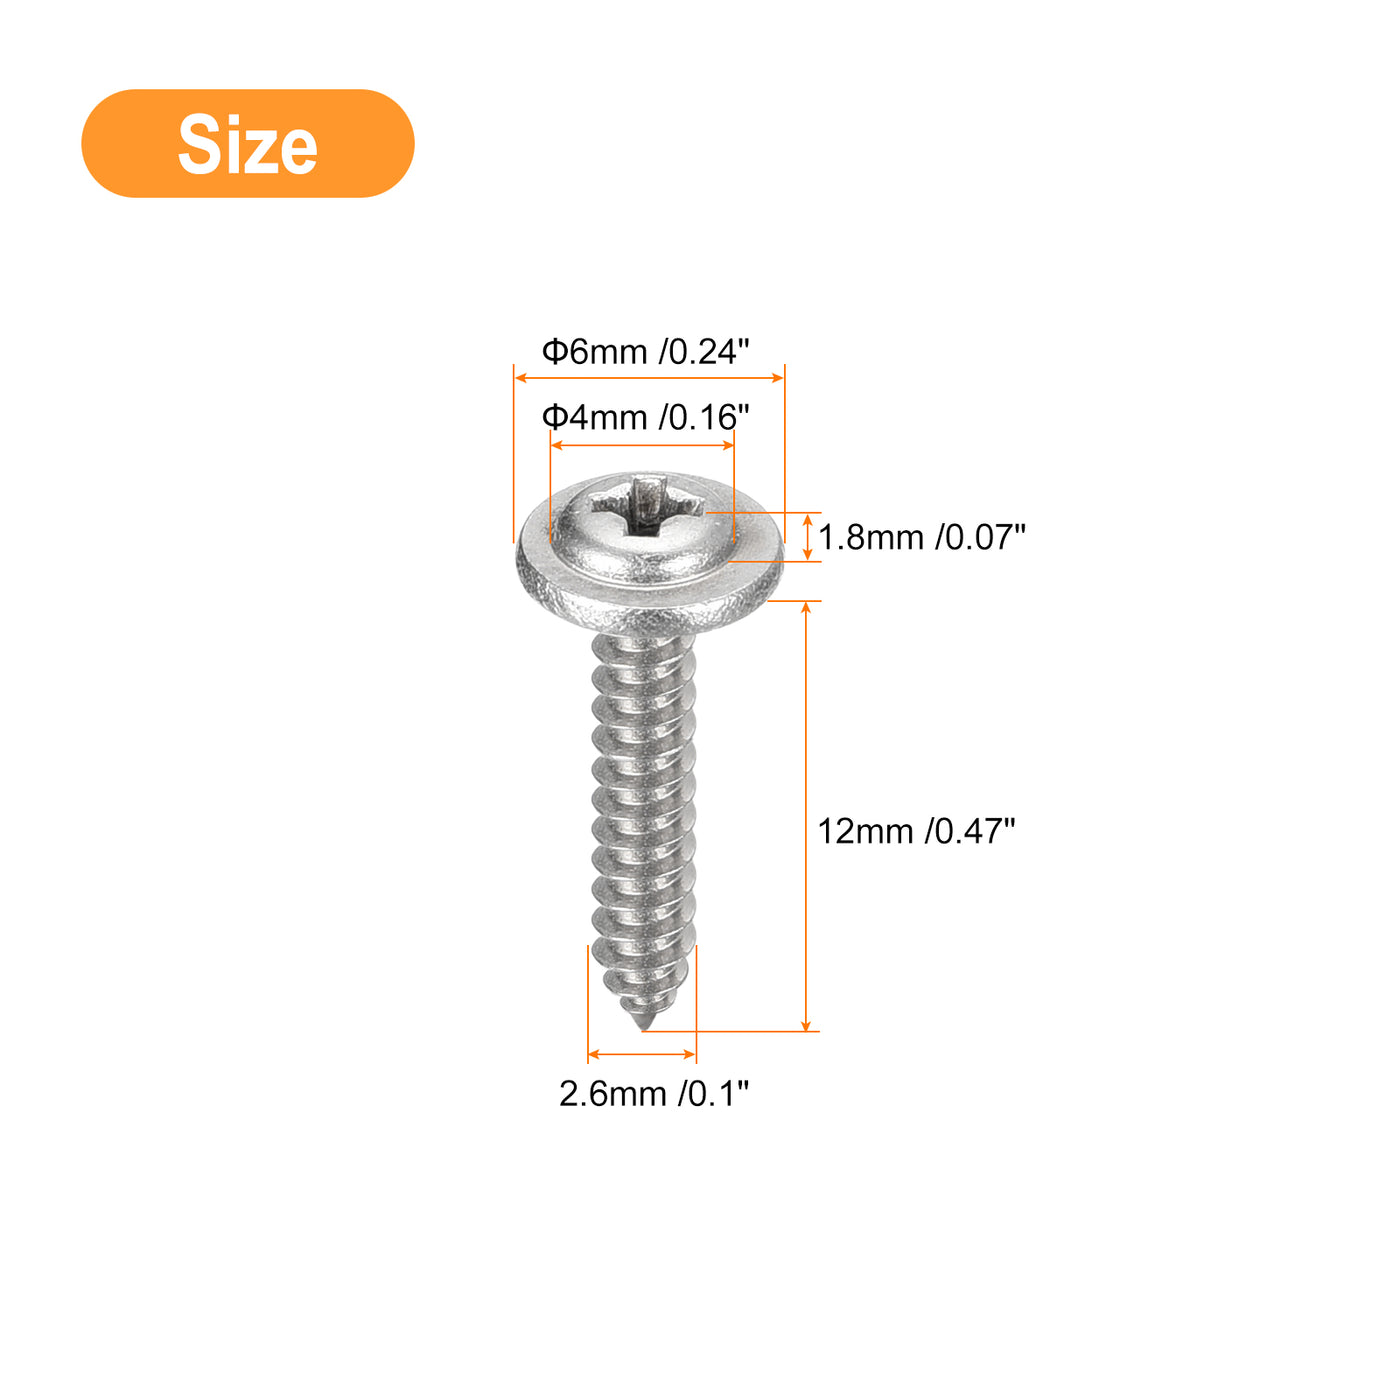 uxcell Uxcell ST2.6x12mm Phillips Pan Head Self-tapping Screw with Washer, 100pcs - 304 Stainless Steel Wood Screw Full Thread (Silver)